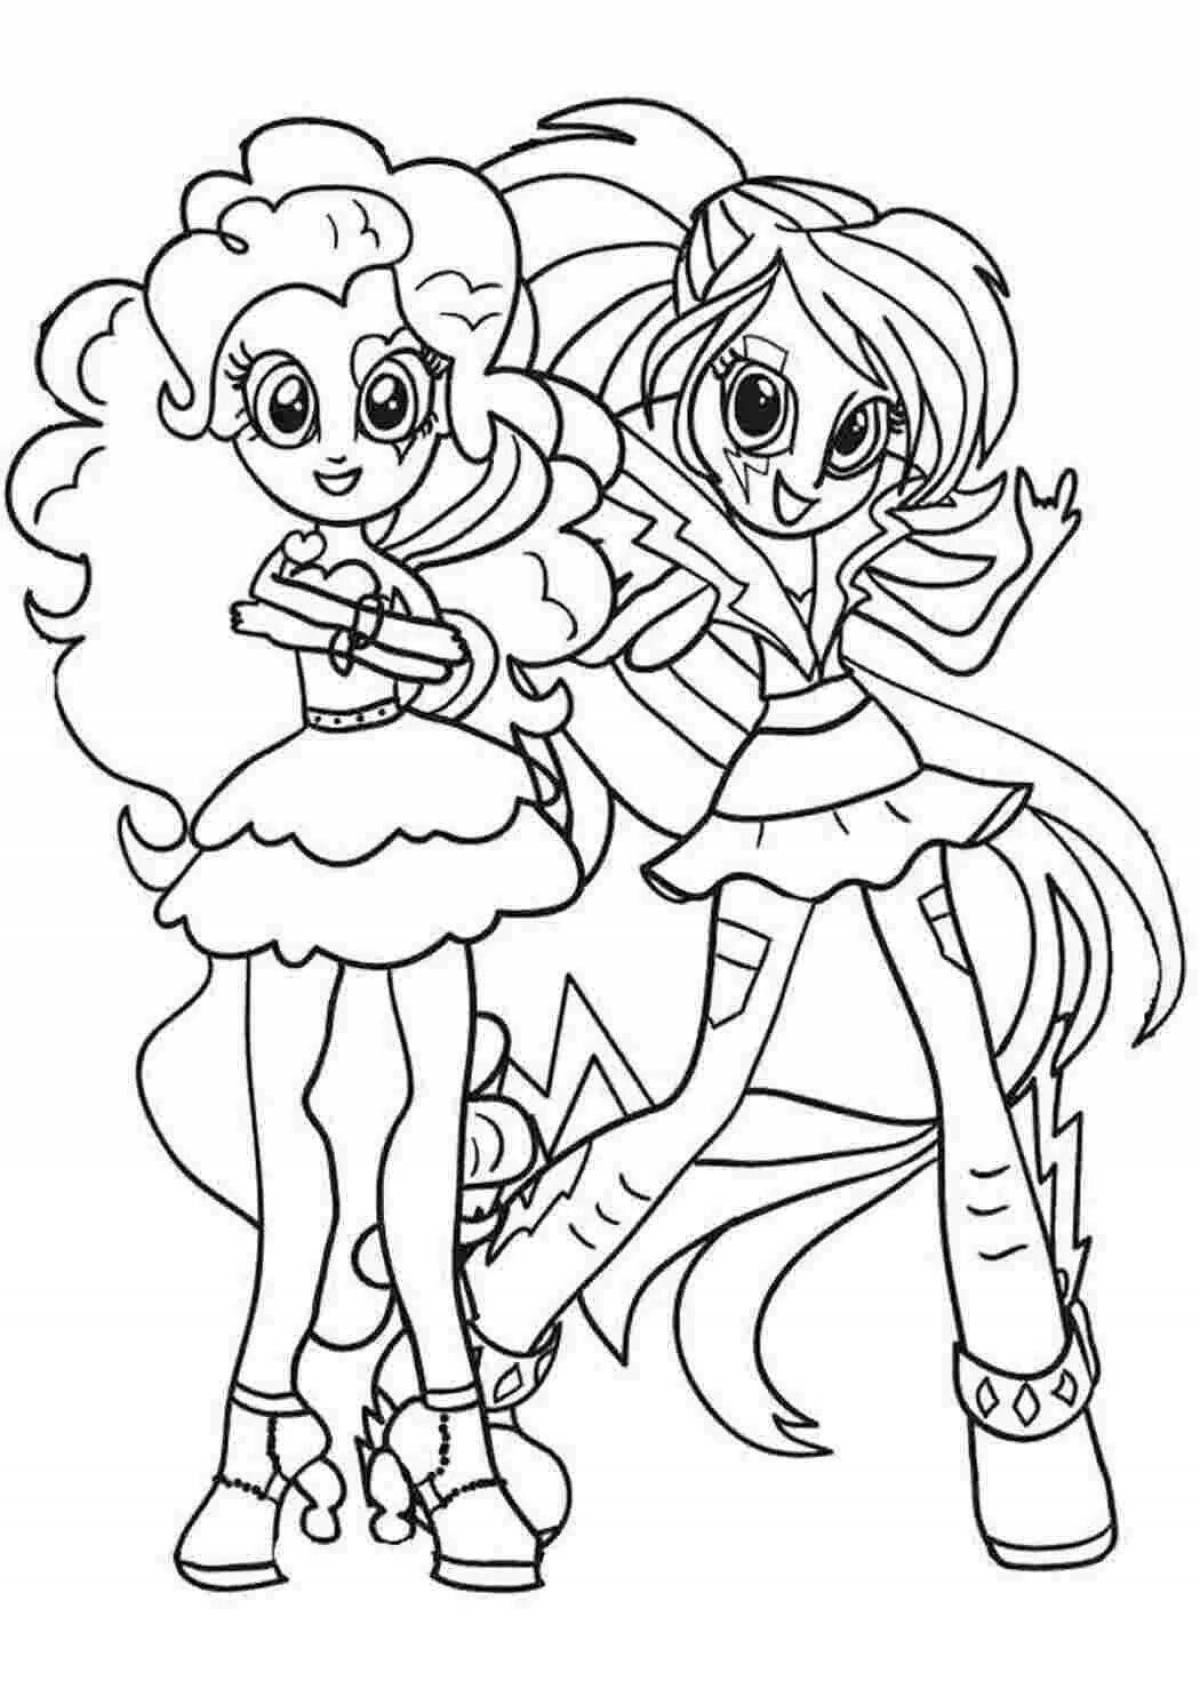 Equestria glamorous pony coloring page